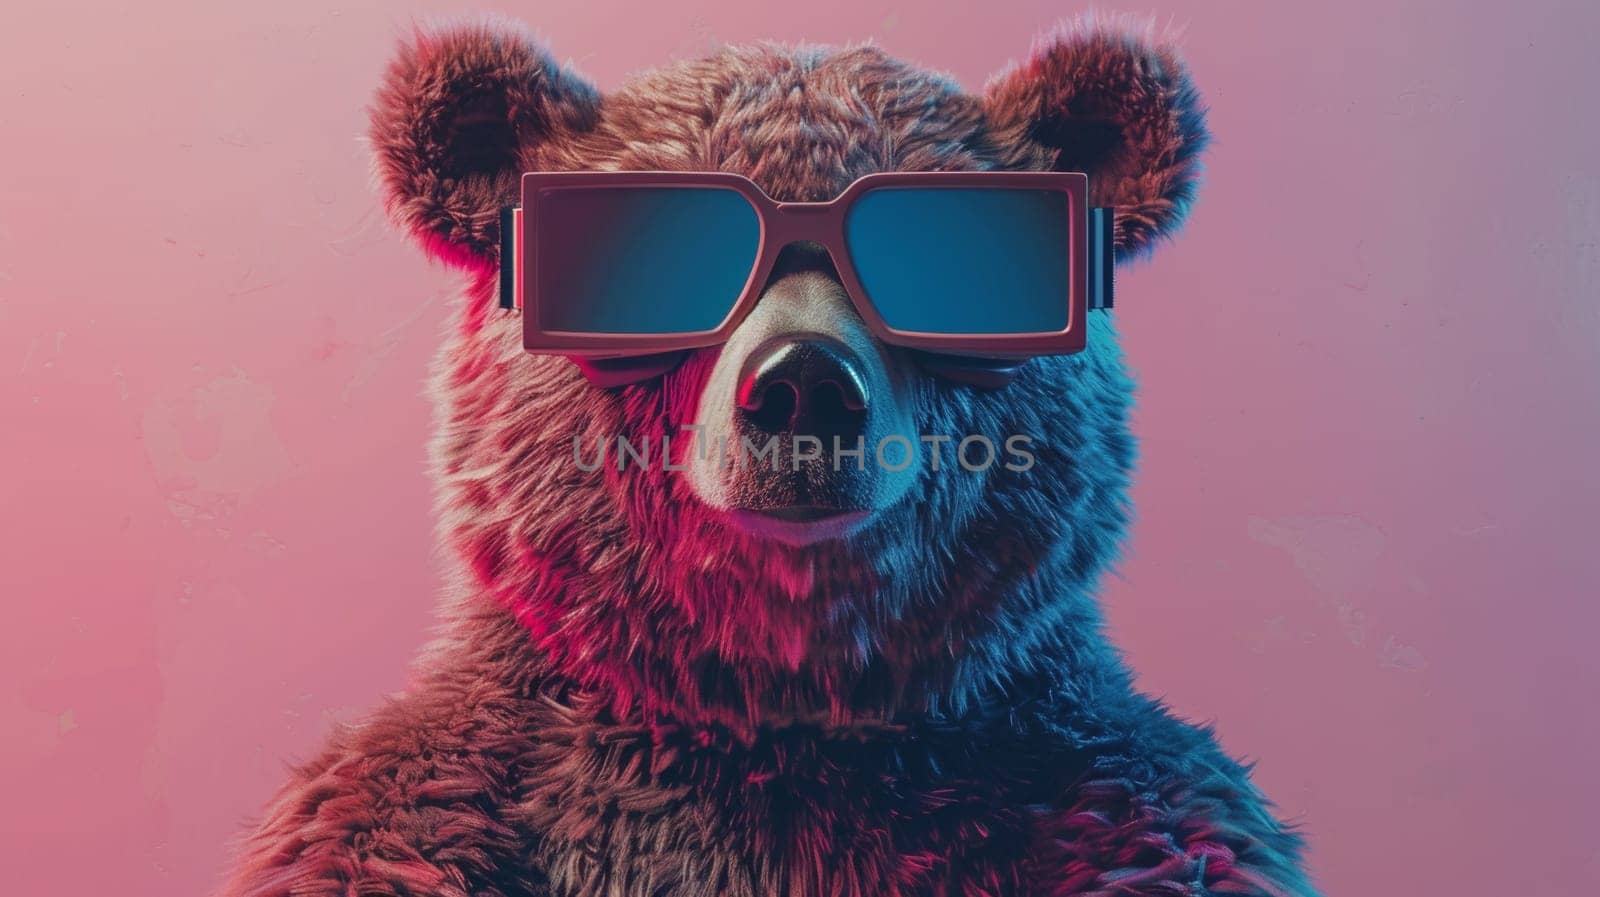 A bear wearing sunglasses with a pink background and red filter, AI by starush